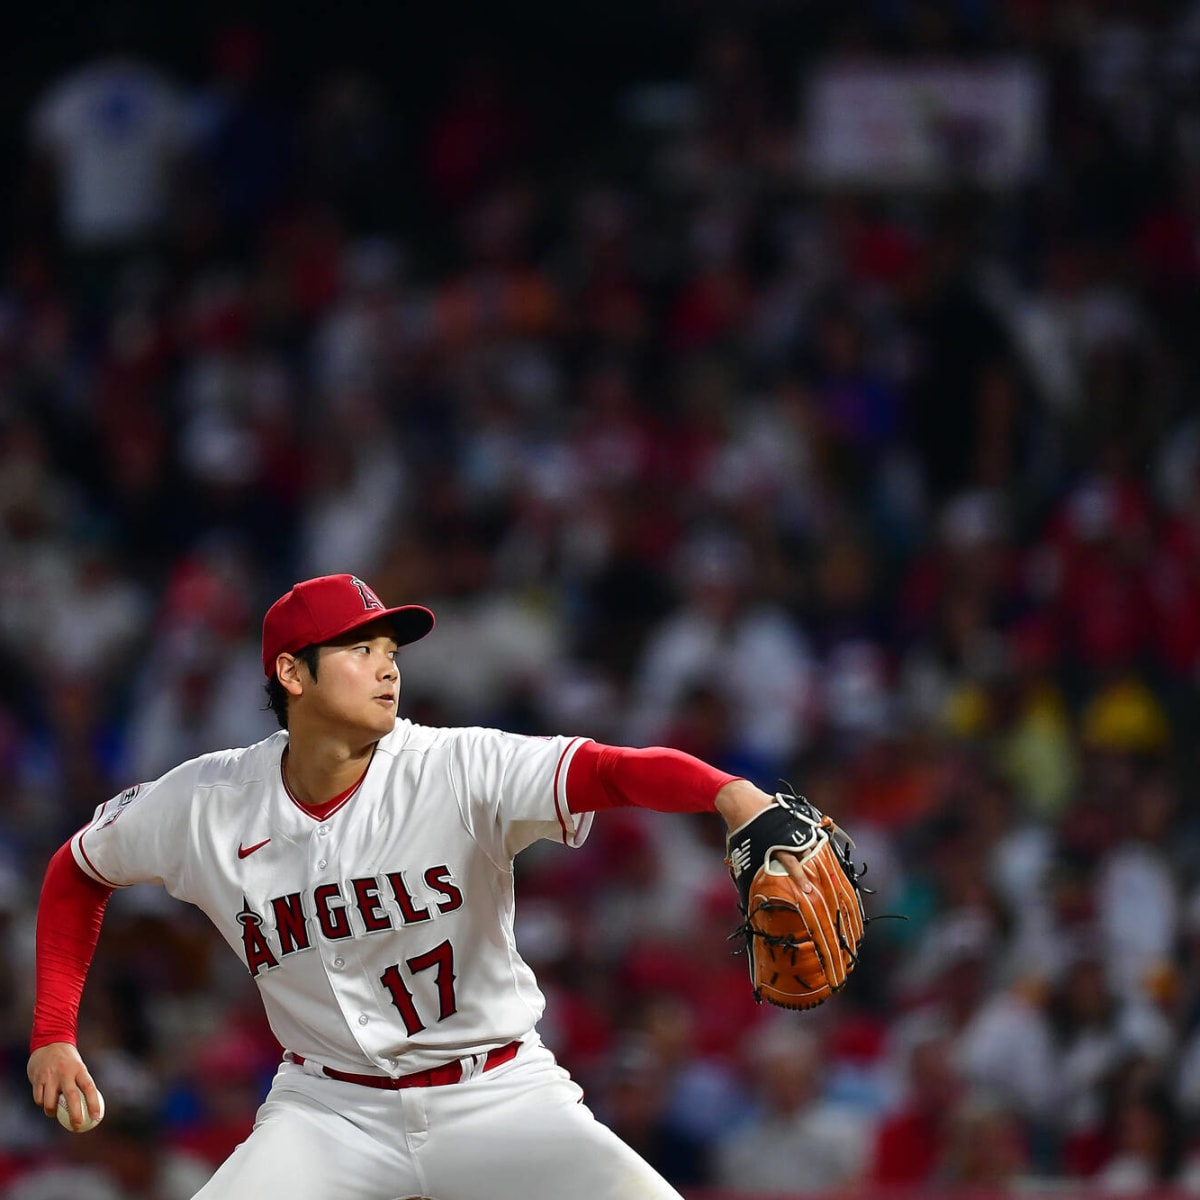 Dusty Baker says Shohei Ohtani has 'one of the cleanest livers